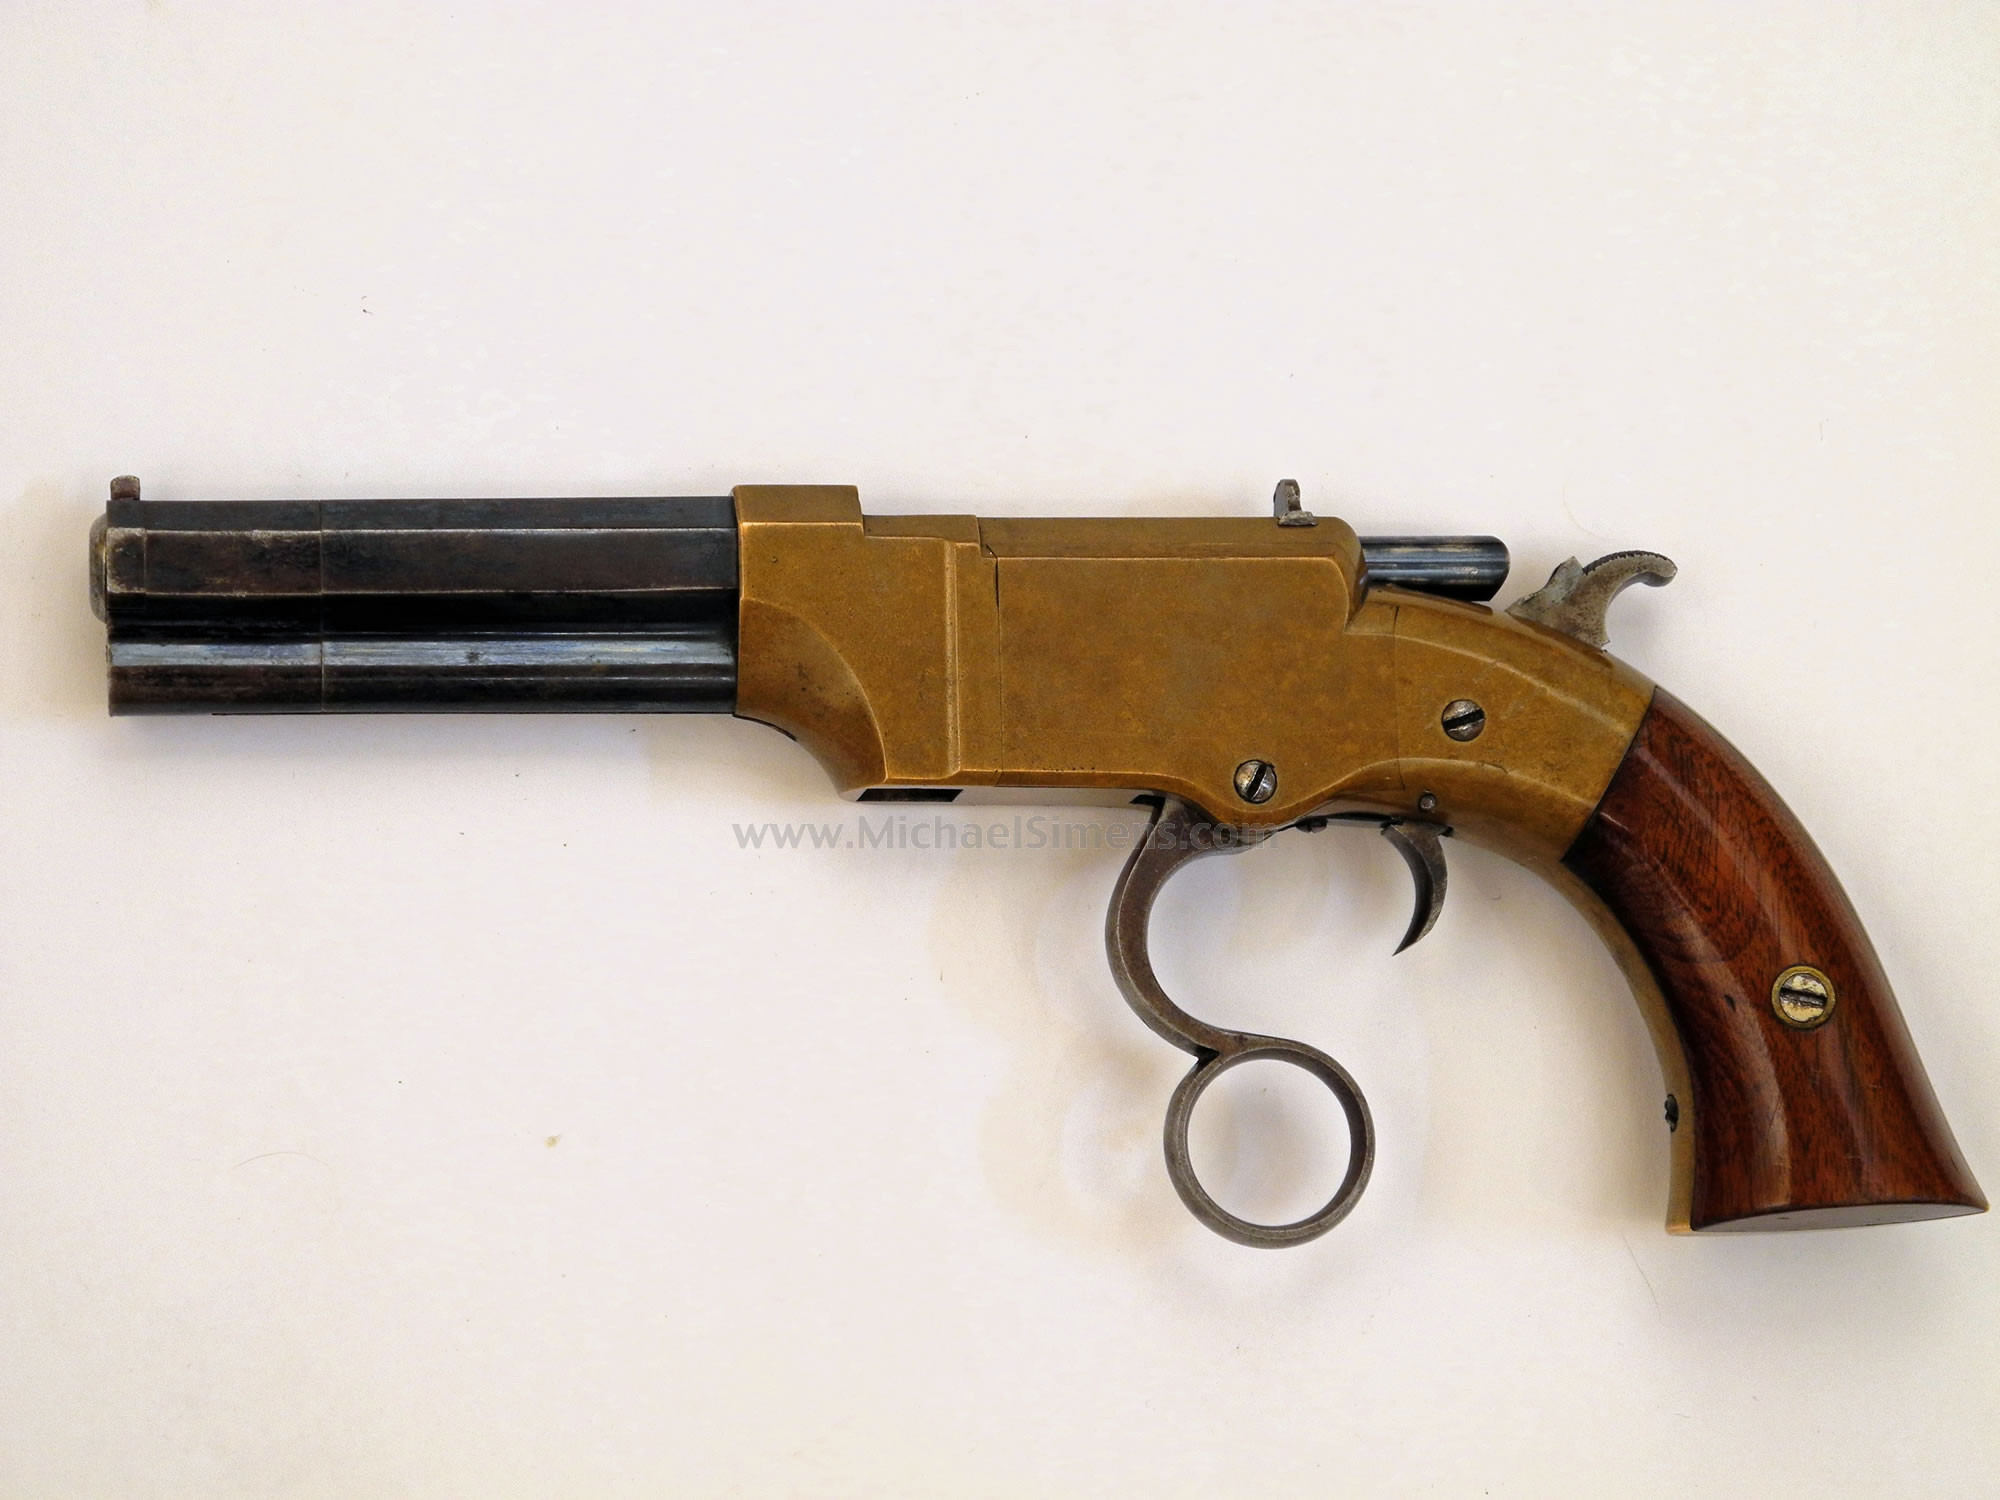 NEW HAVEN ARMS VOLCANIC SMALL FRAME LEVER ACTION PISTOL